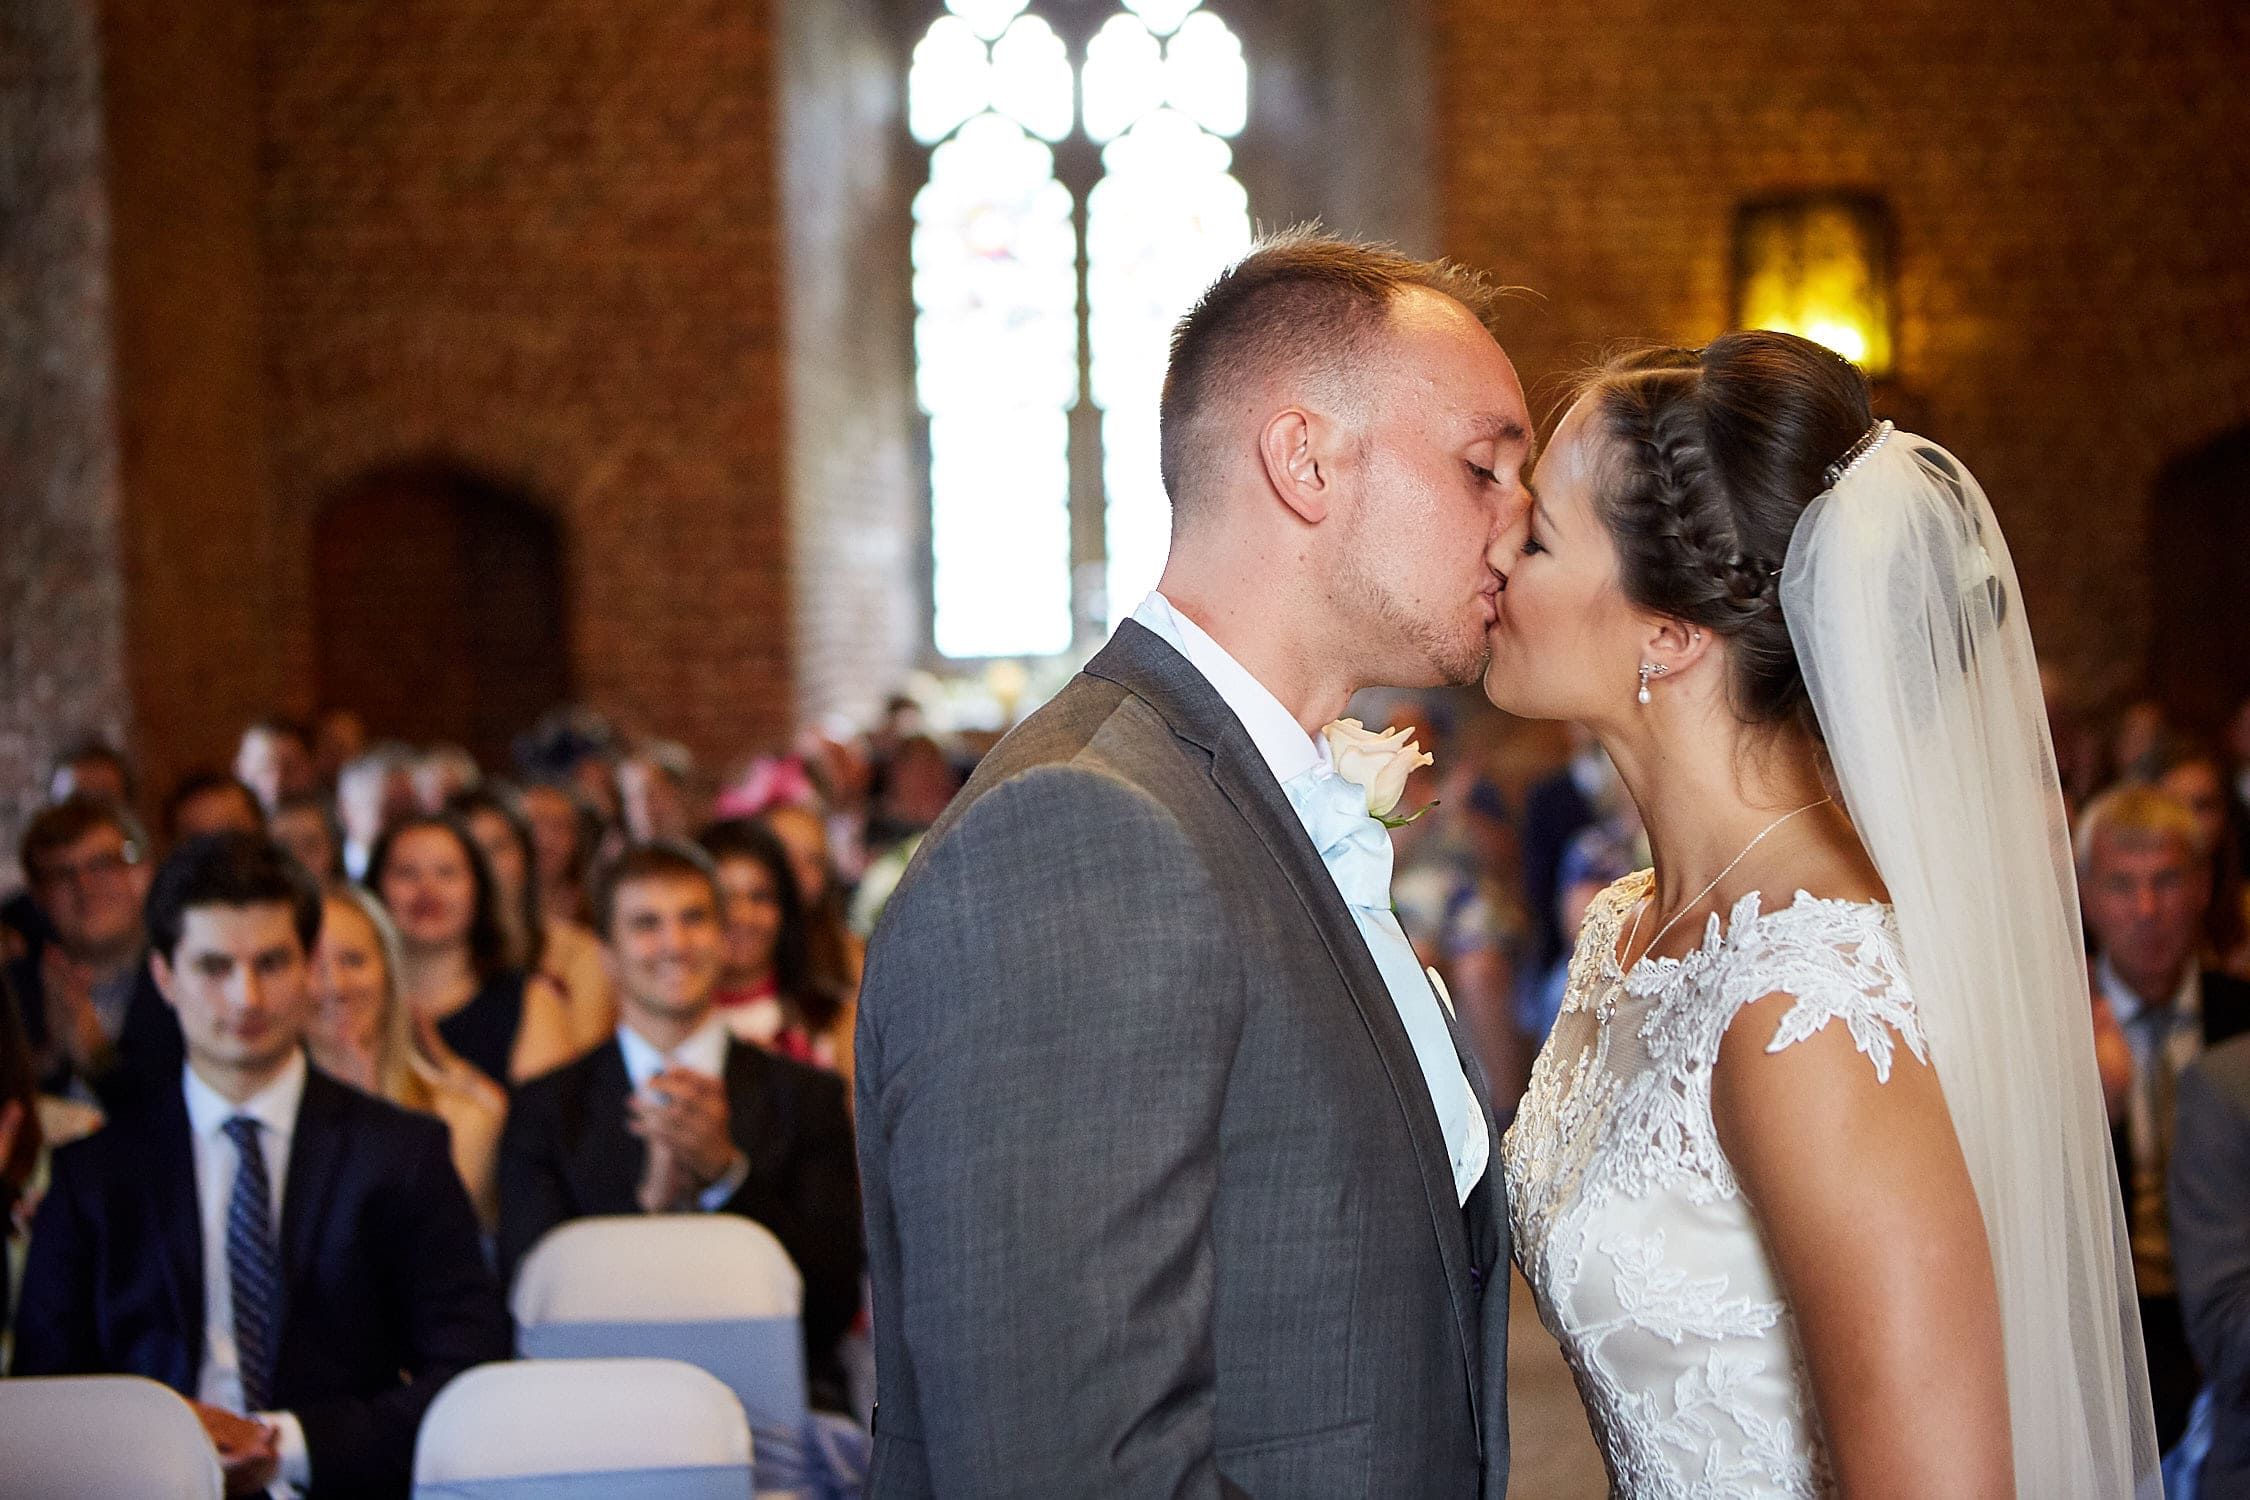 A groom kisses his new wife at the ceremony